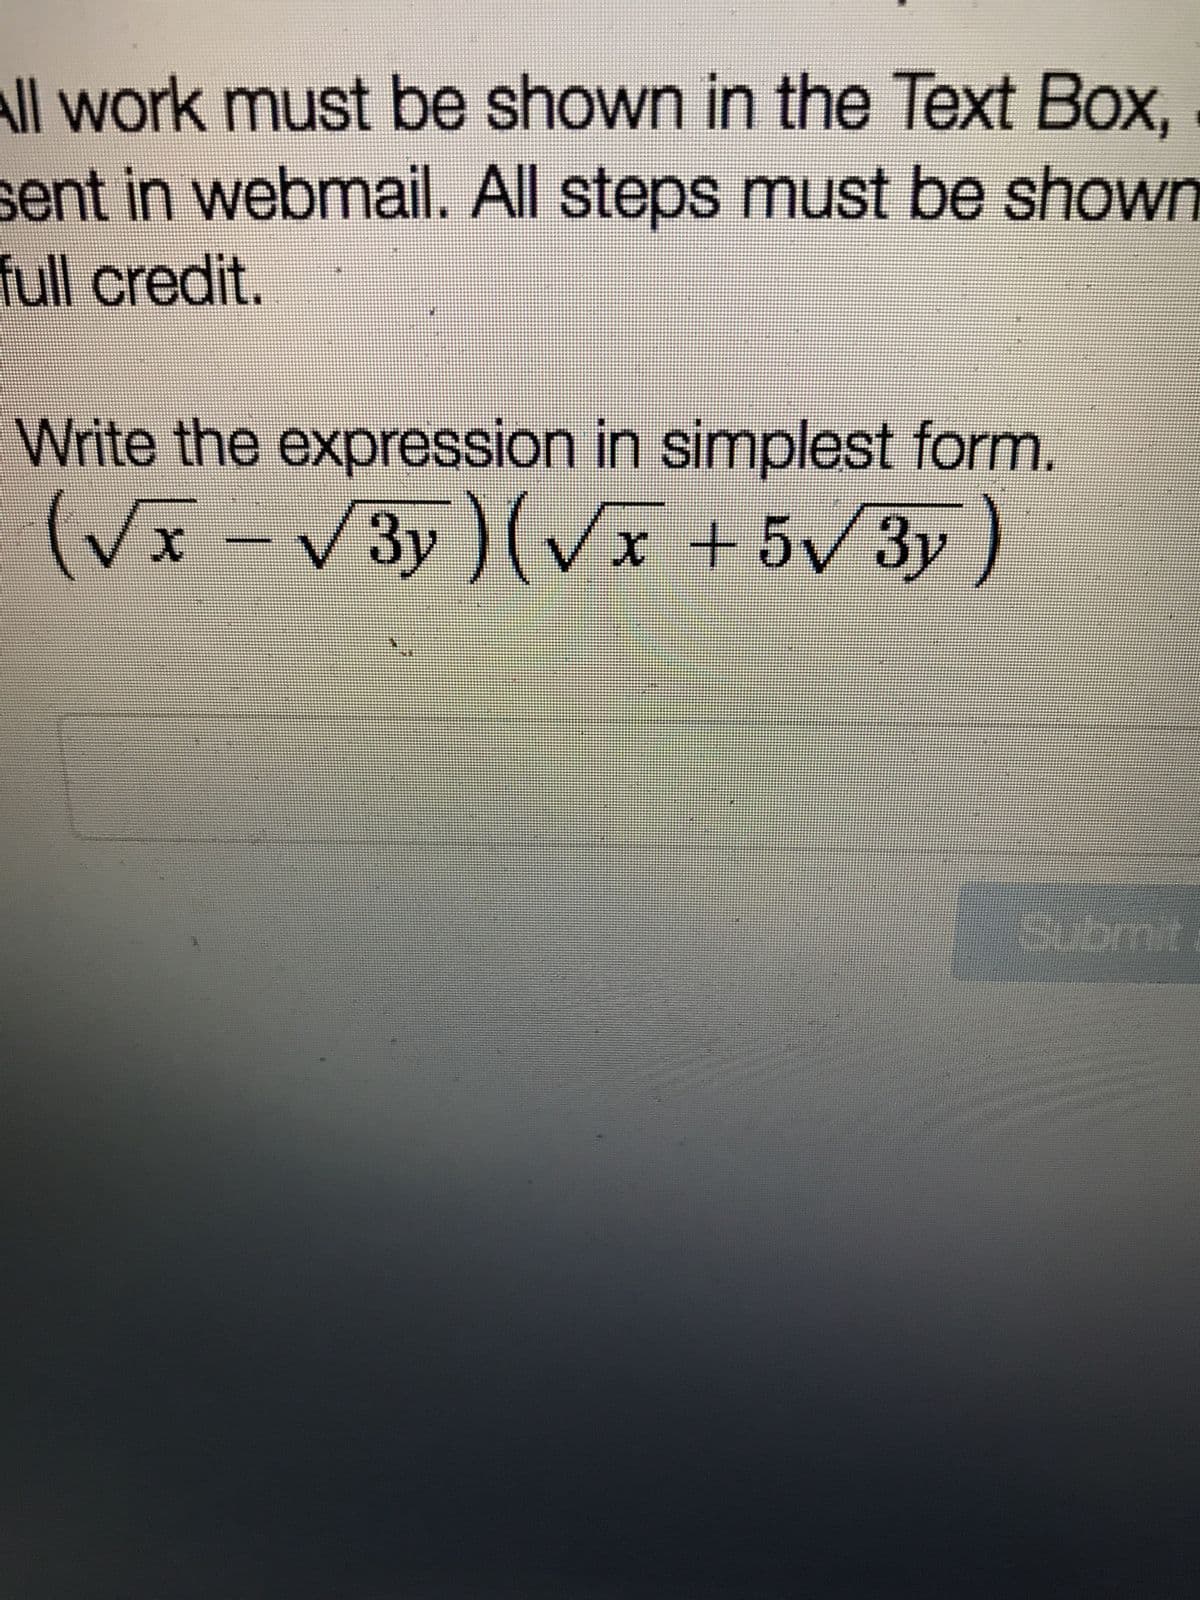 All work must be shown in the Text Box,
sent in webmail. All steps must be shown
full credit.
Write the expression in simplest form.
(√x - √√√3y) (√√x +5√3y)
41
Submit